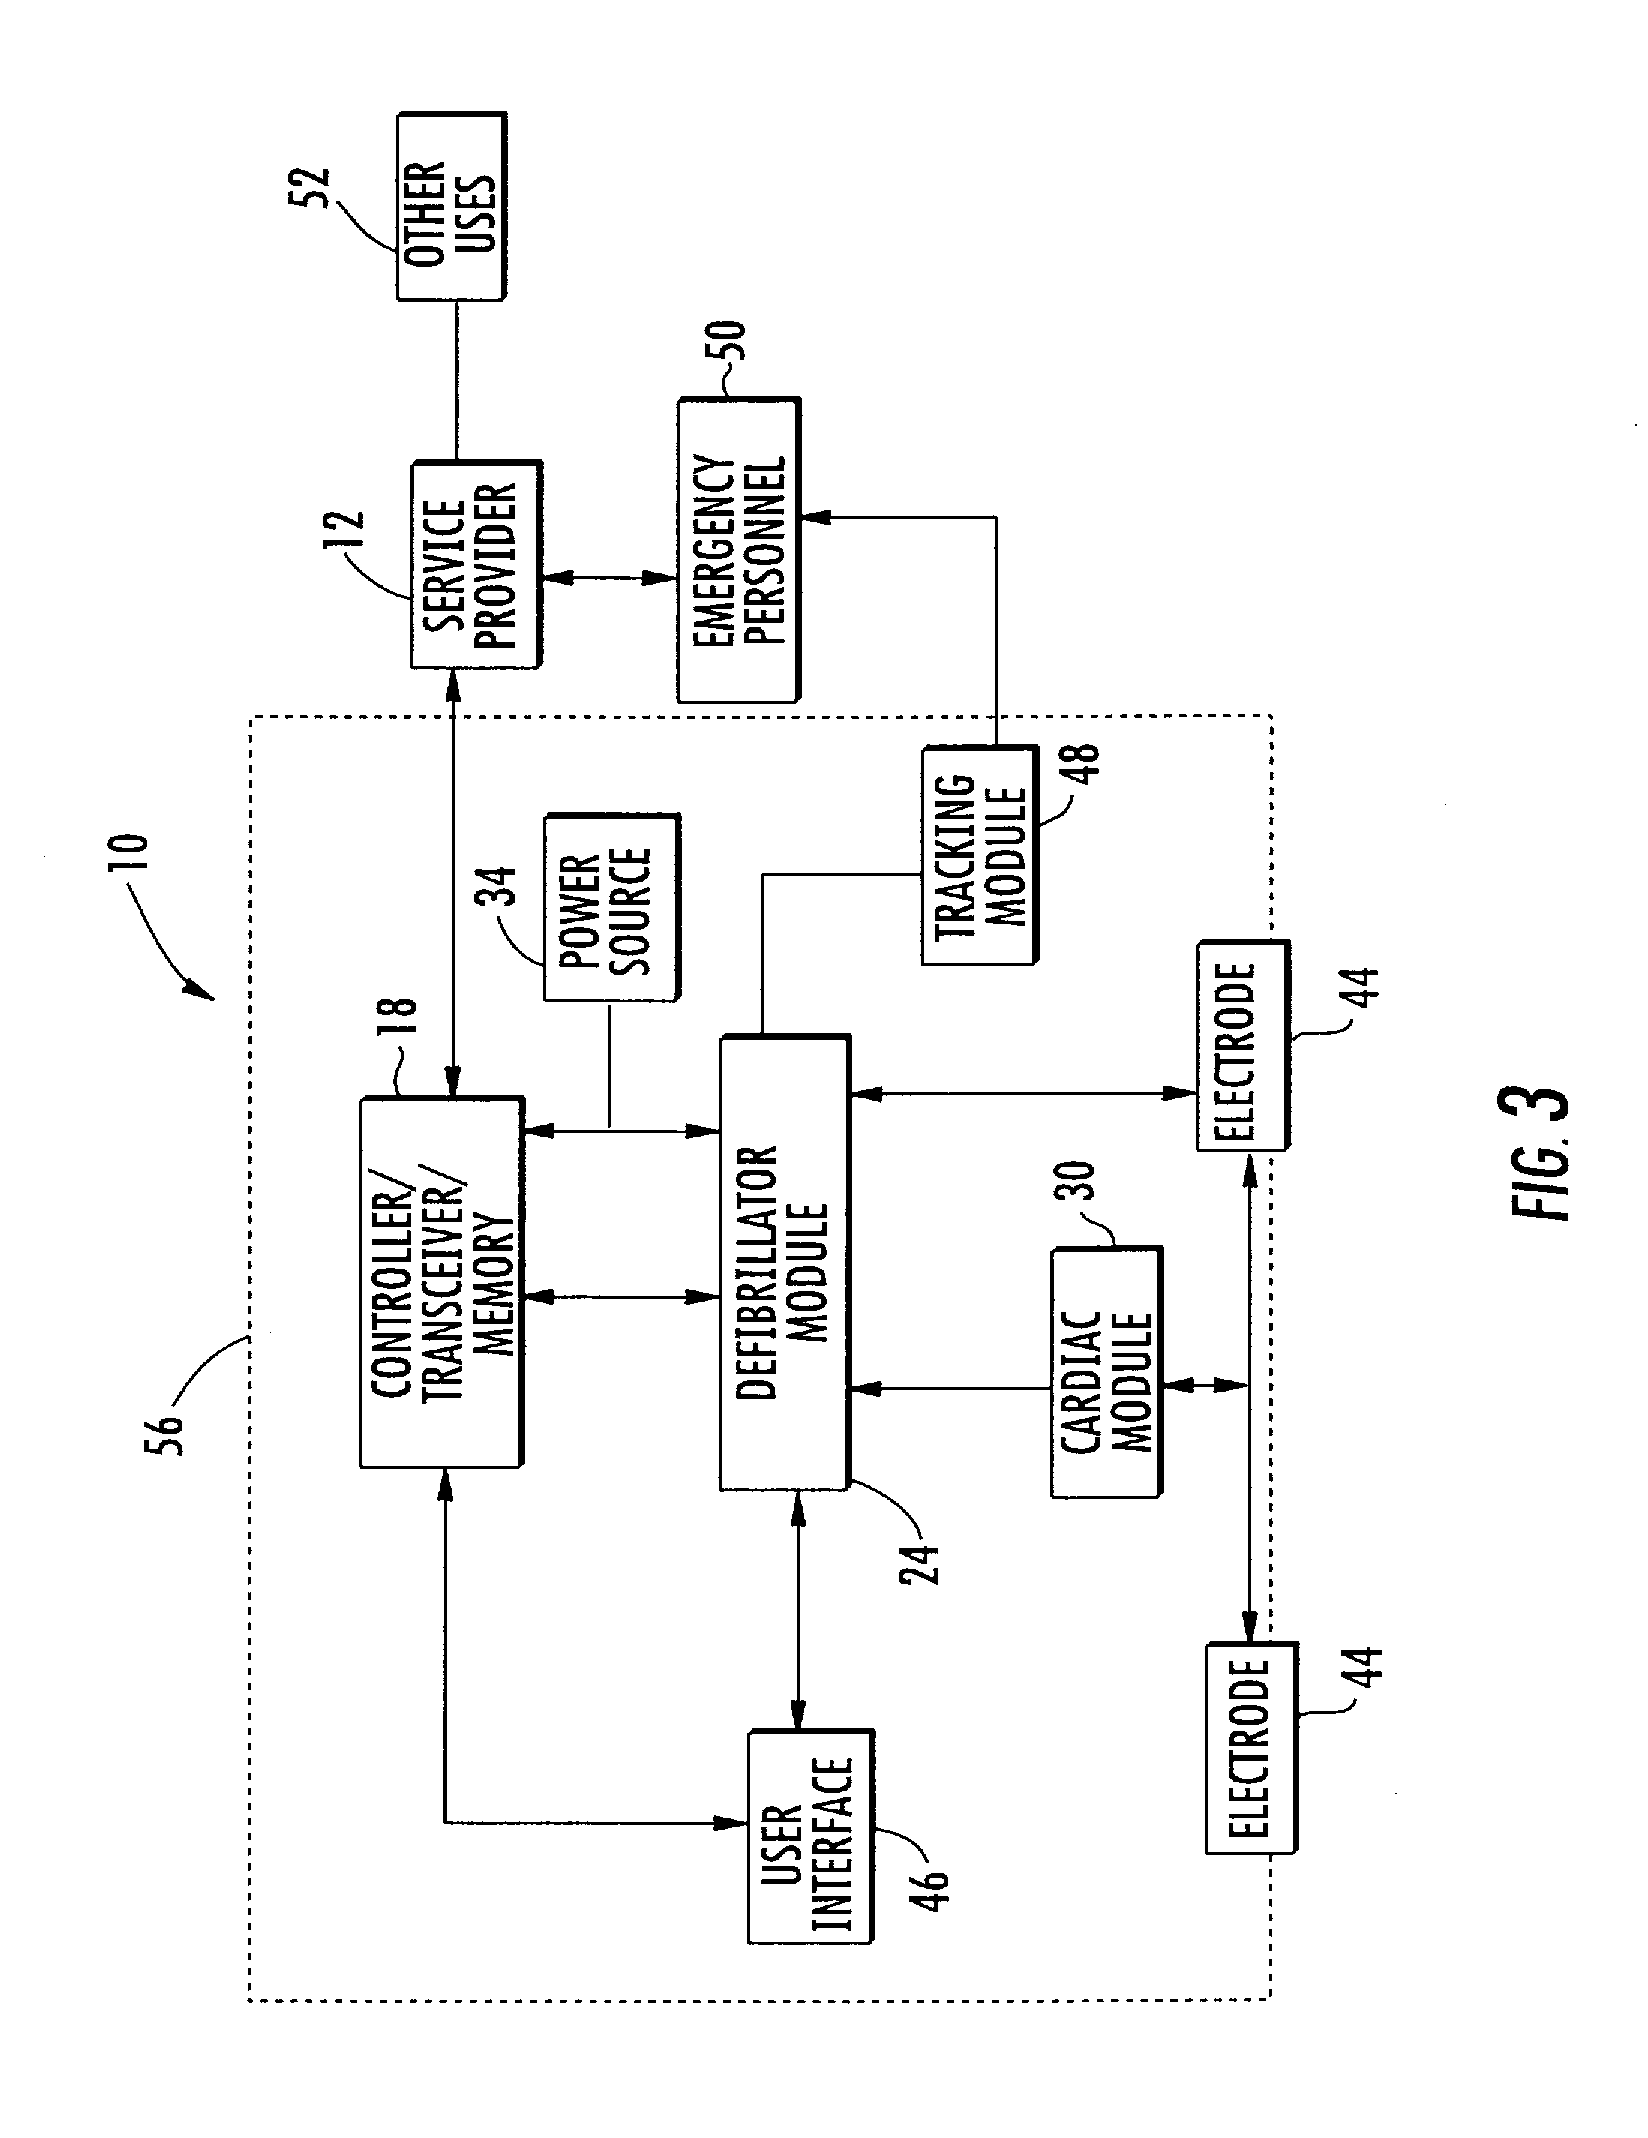 Wireless communication device with integrated defibrillator